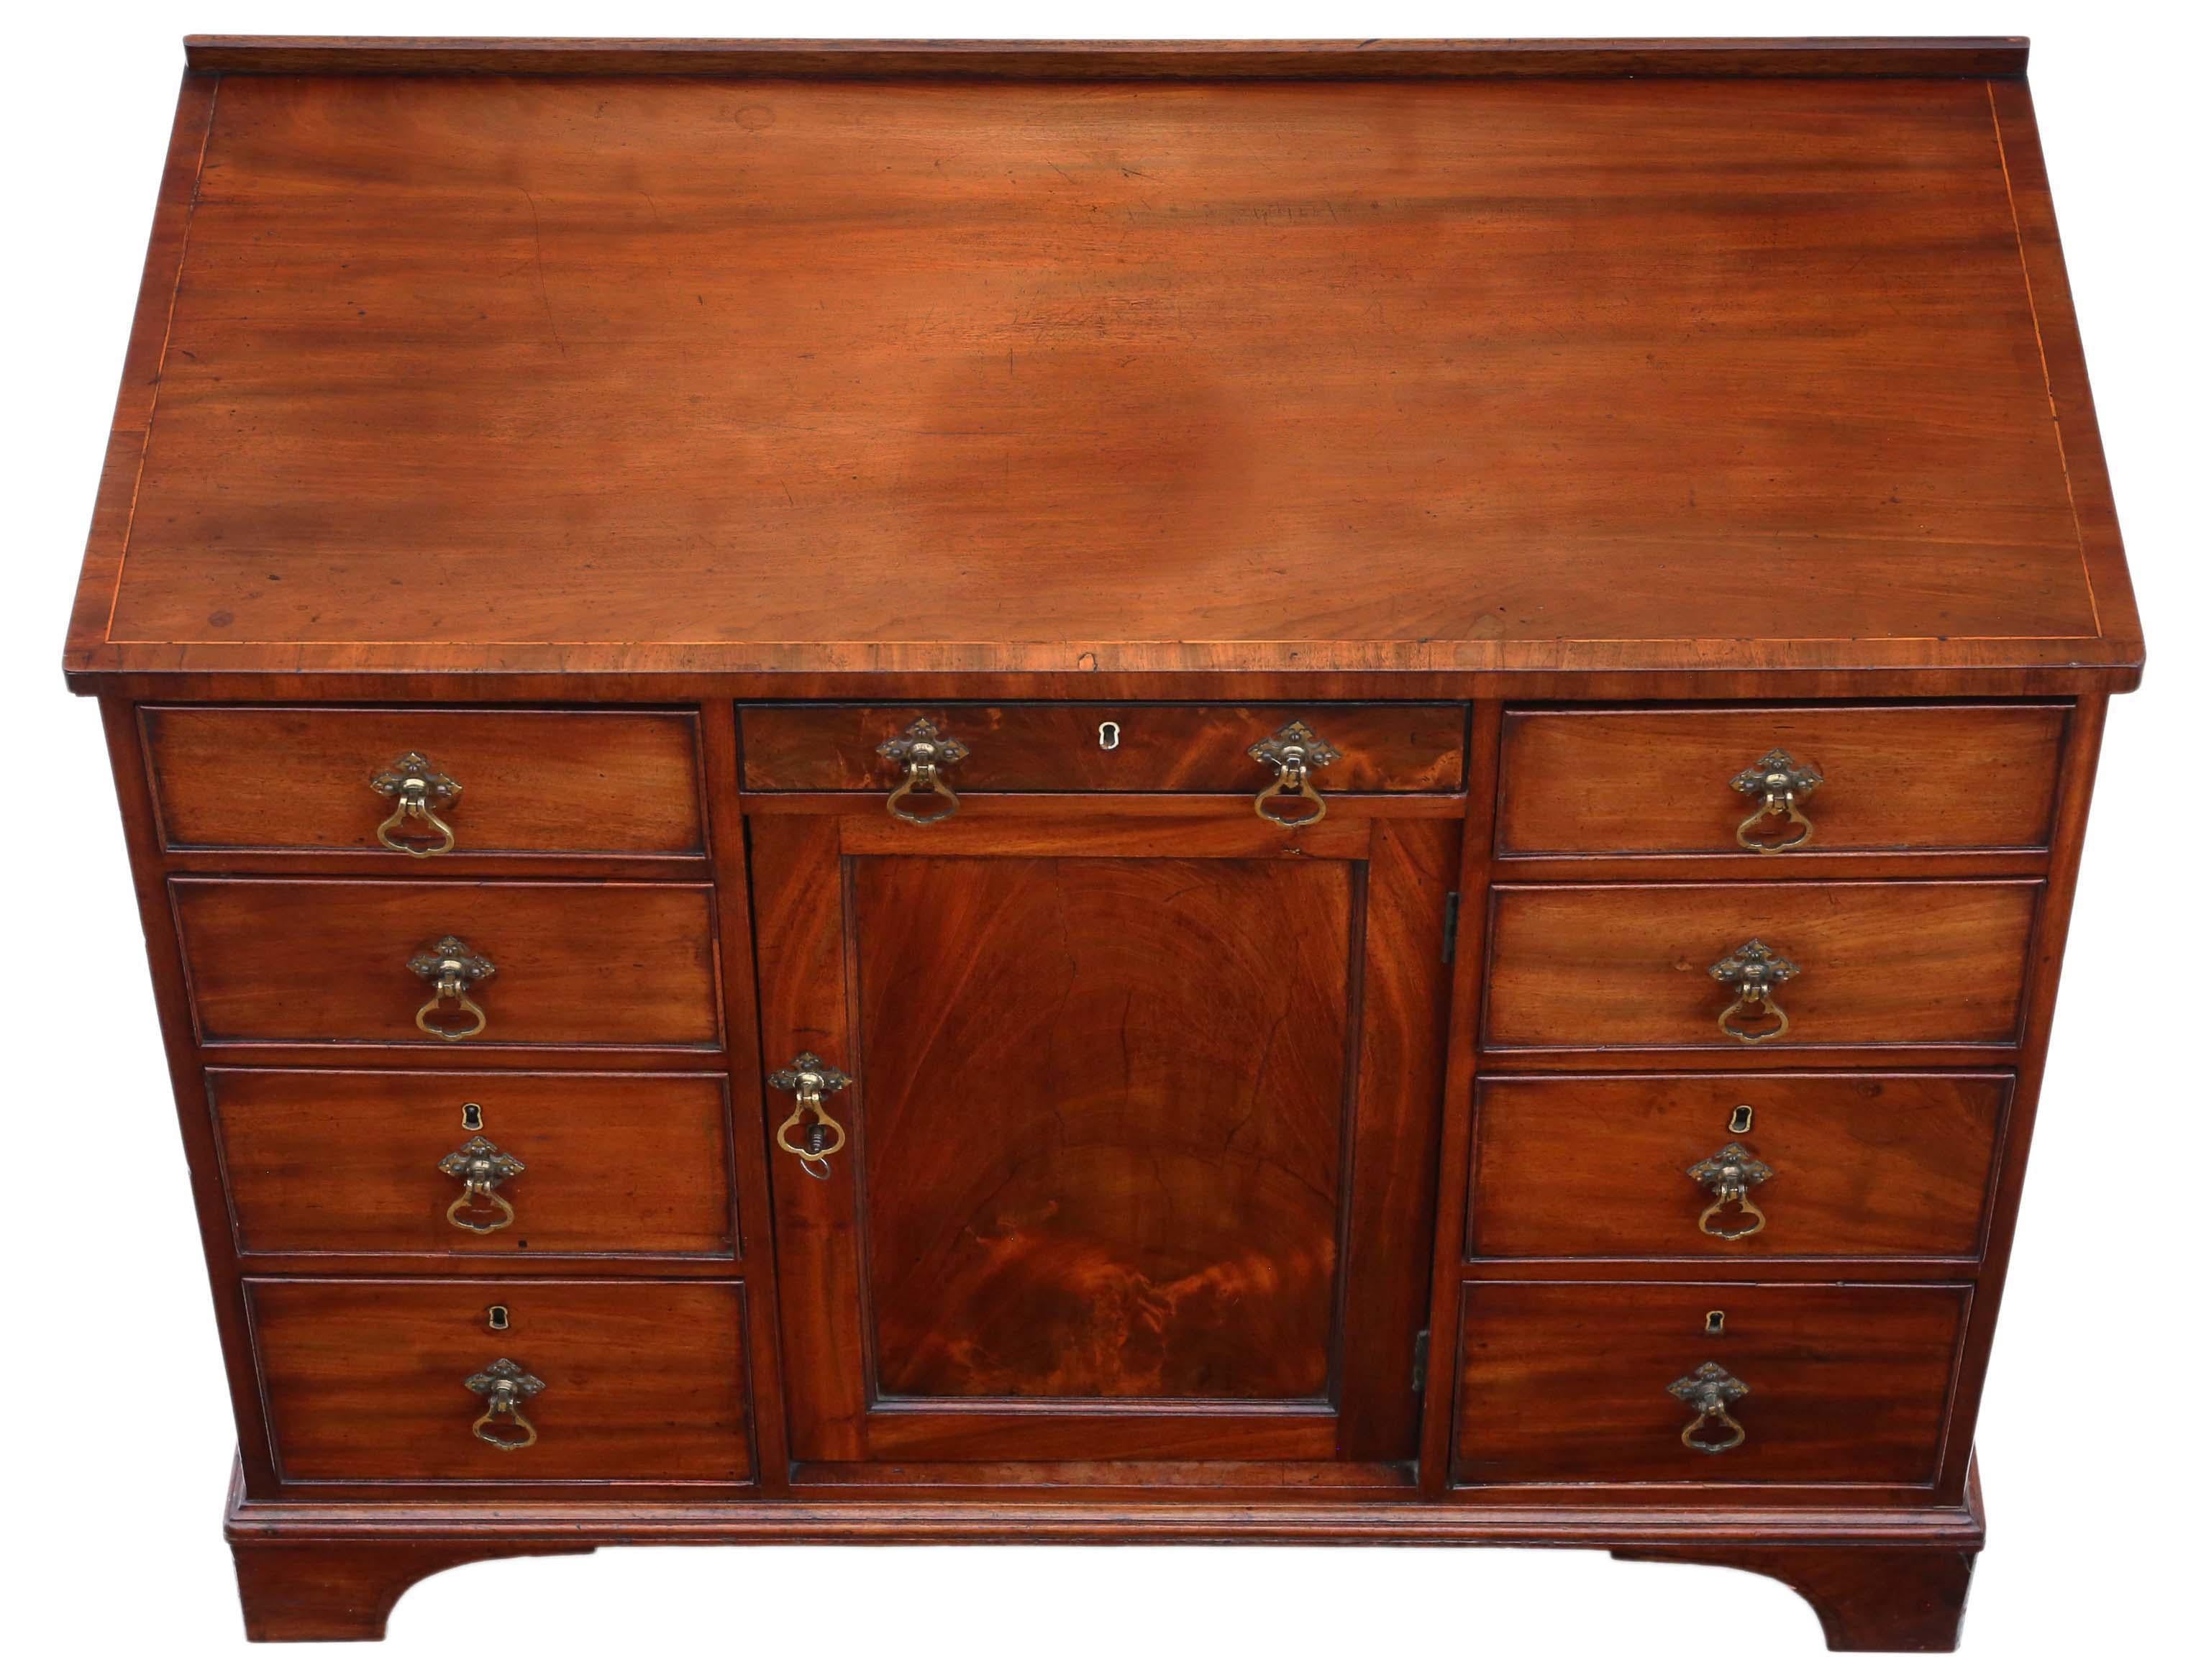 Antique Georgian 19th Century Mahogany Writing Desk Dressing Table In Good Condition For Sale In Wisbech, Cambridgeshire